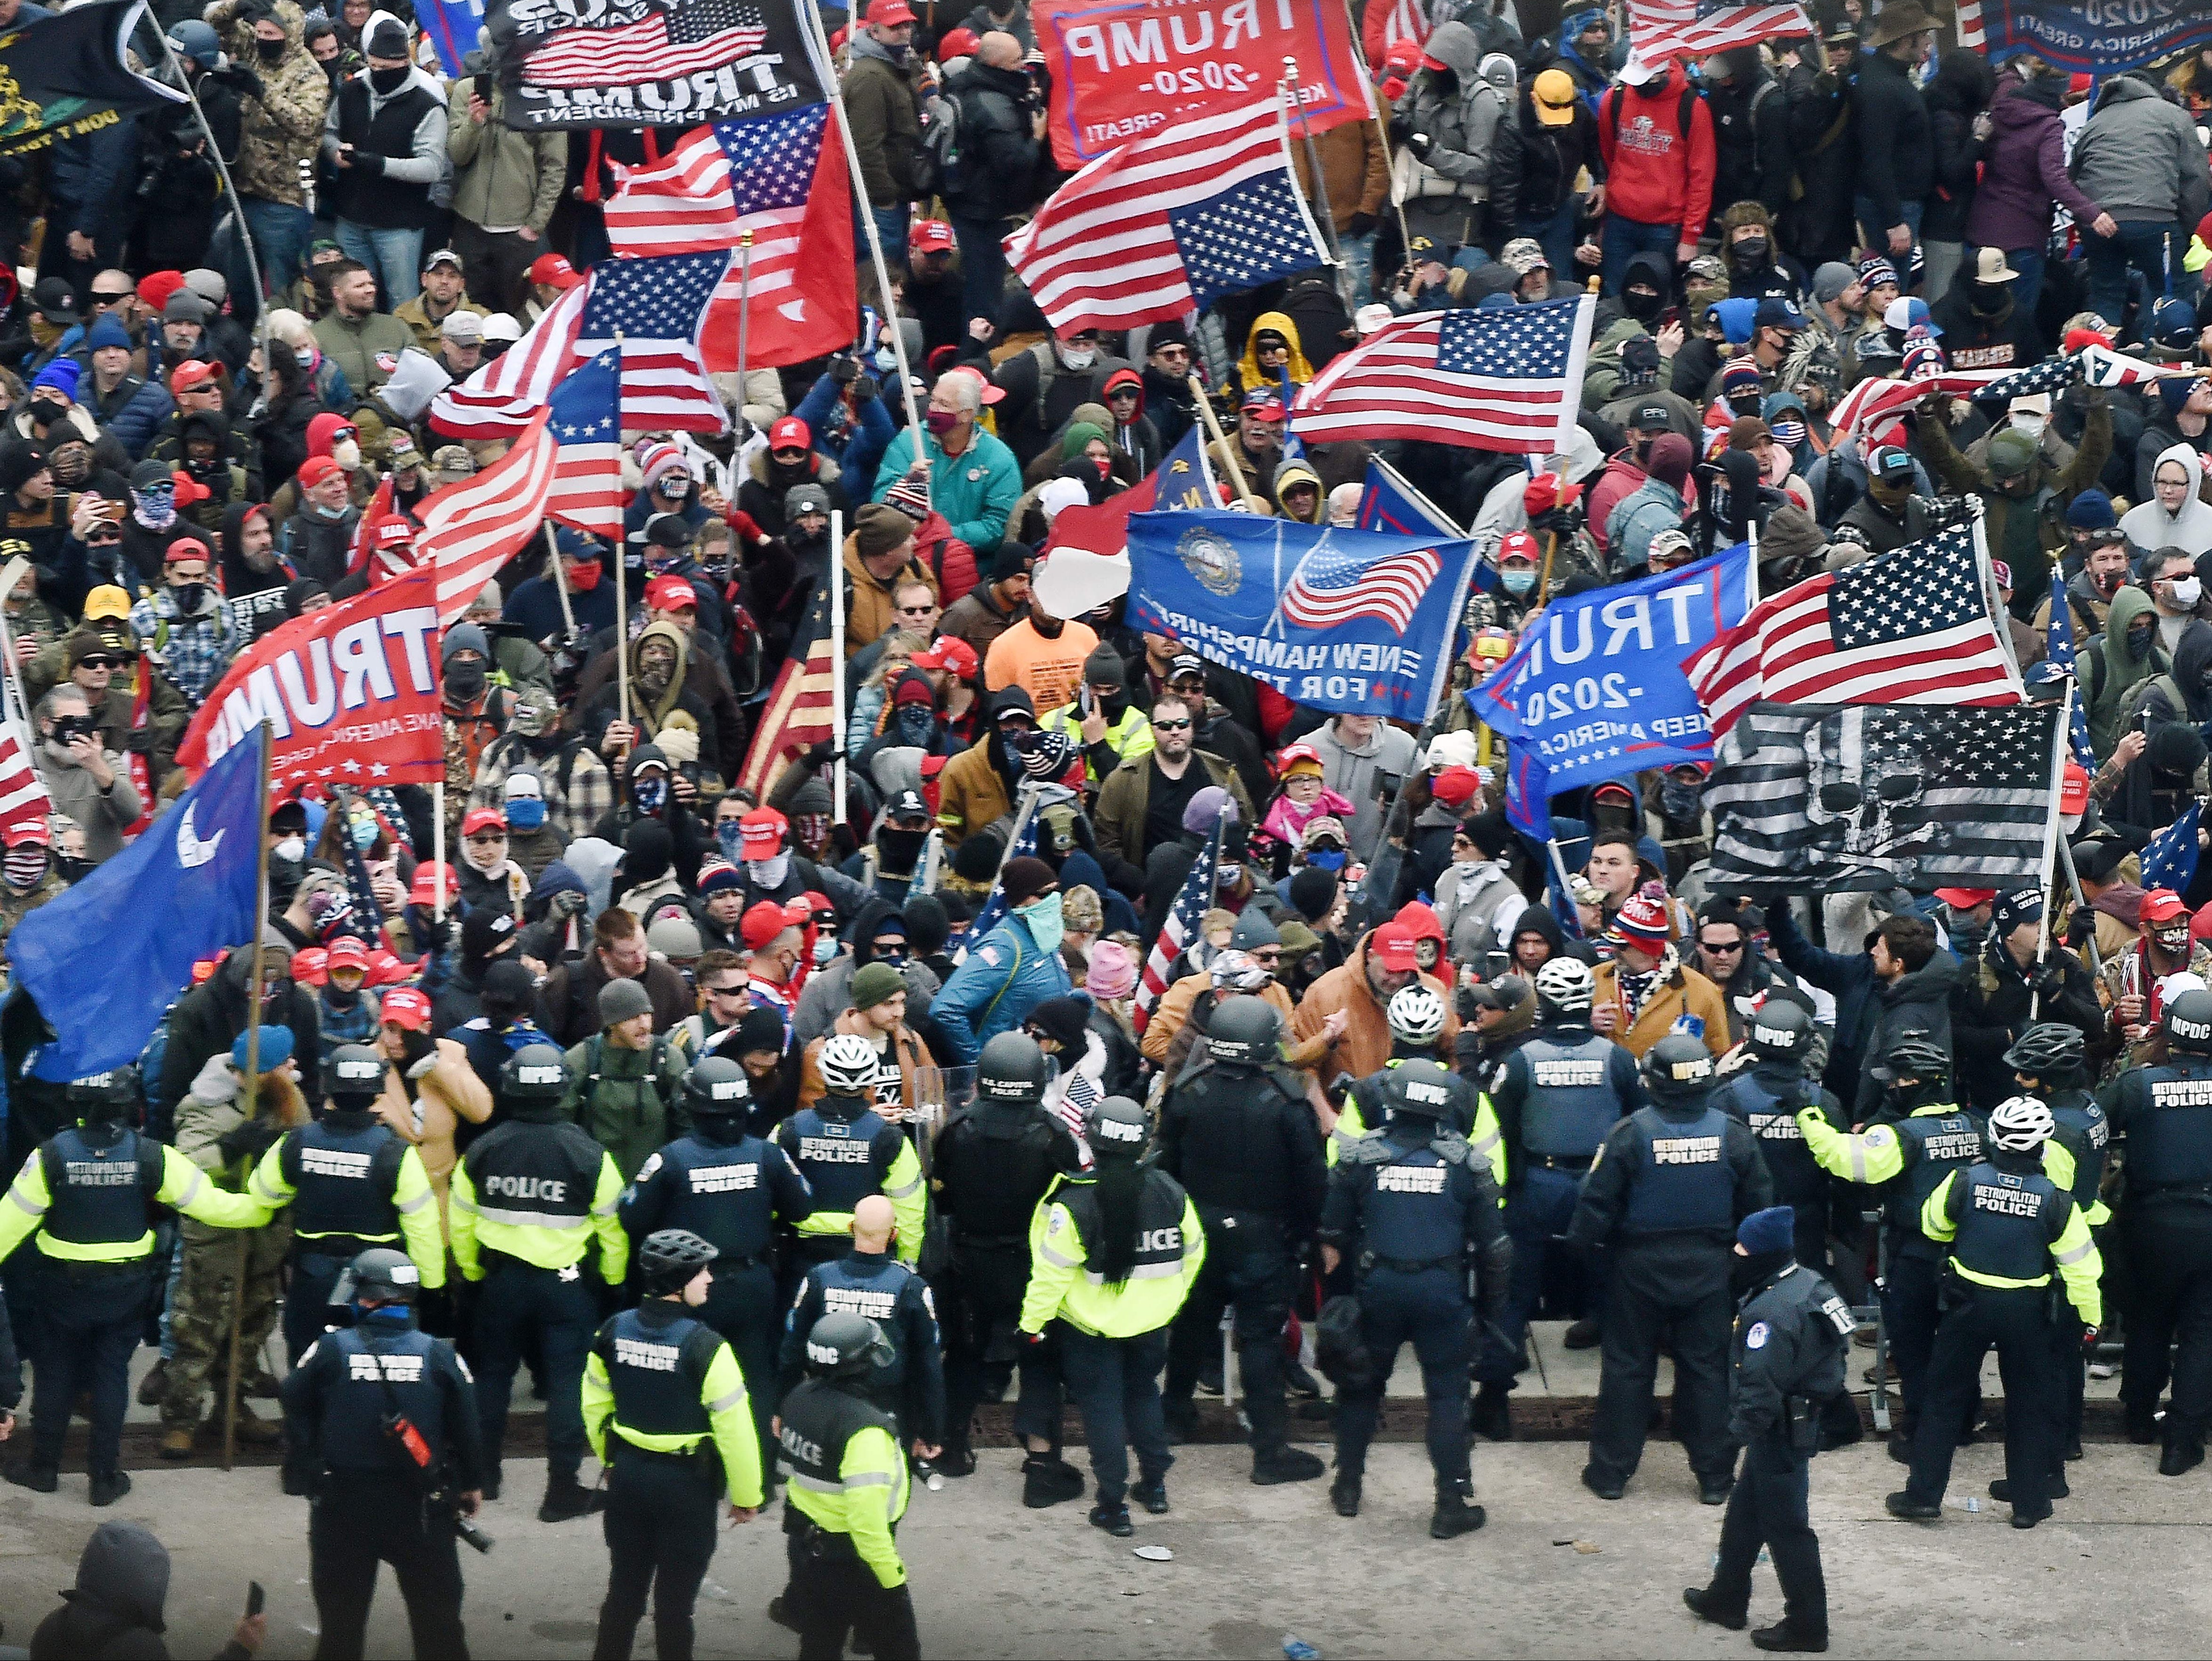 Trump supporters clash with police and security forces as they storm the US Capitol in Washington, DC on 6 January 2021